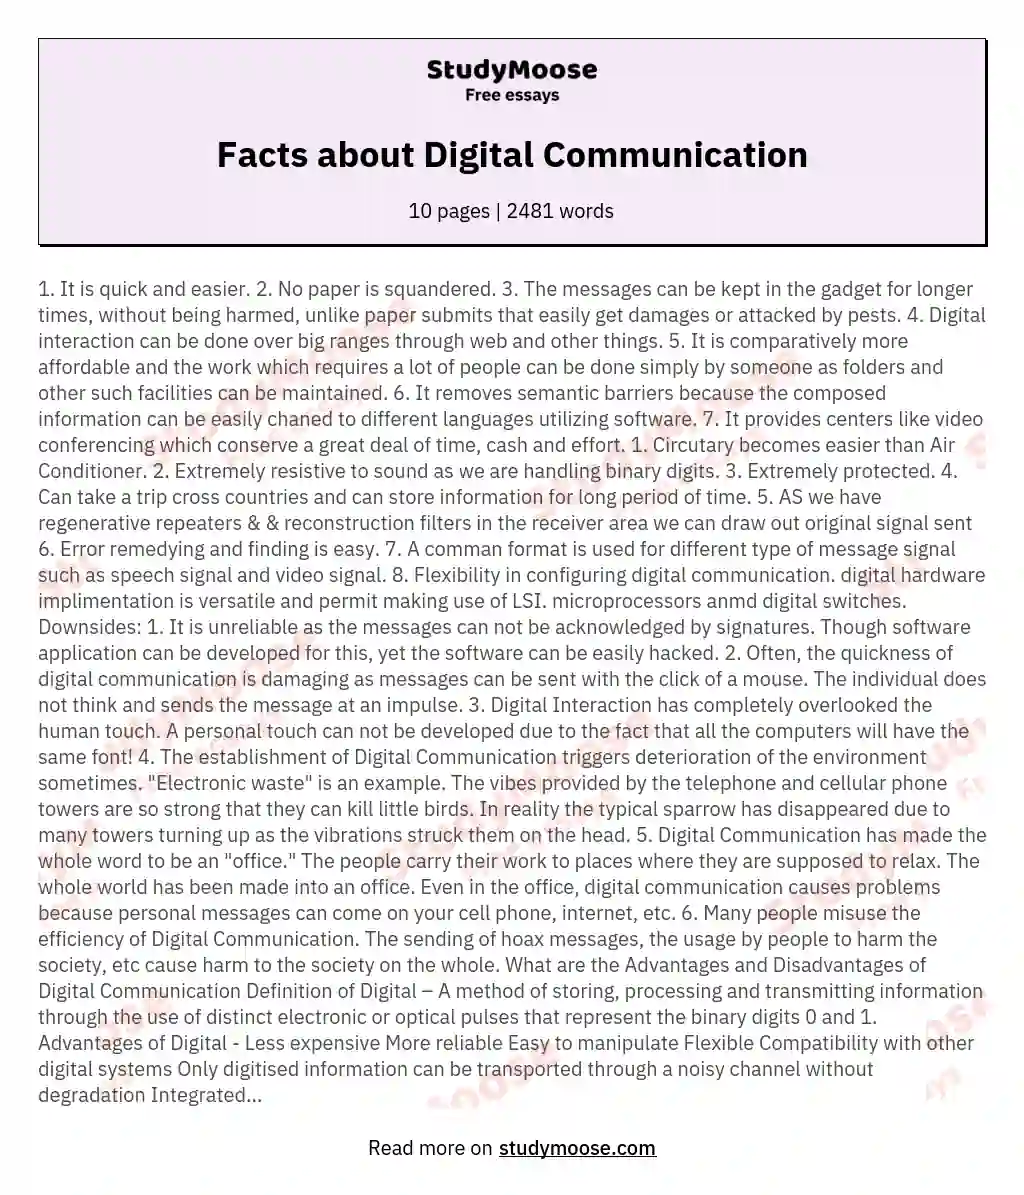 Facts about Digital Communication essay